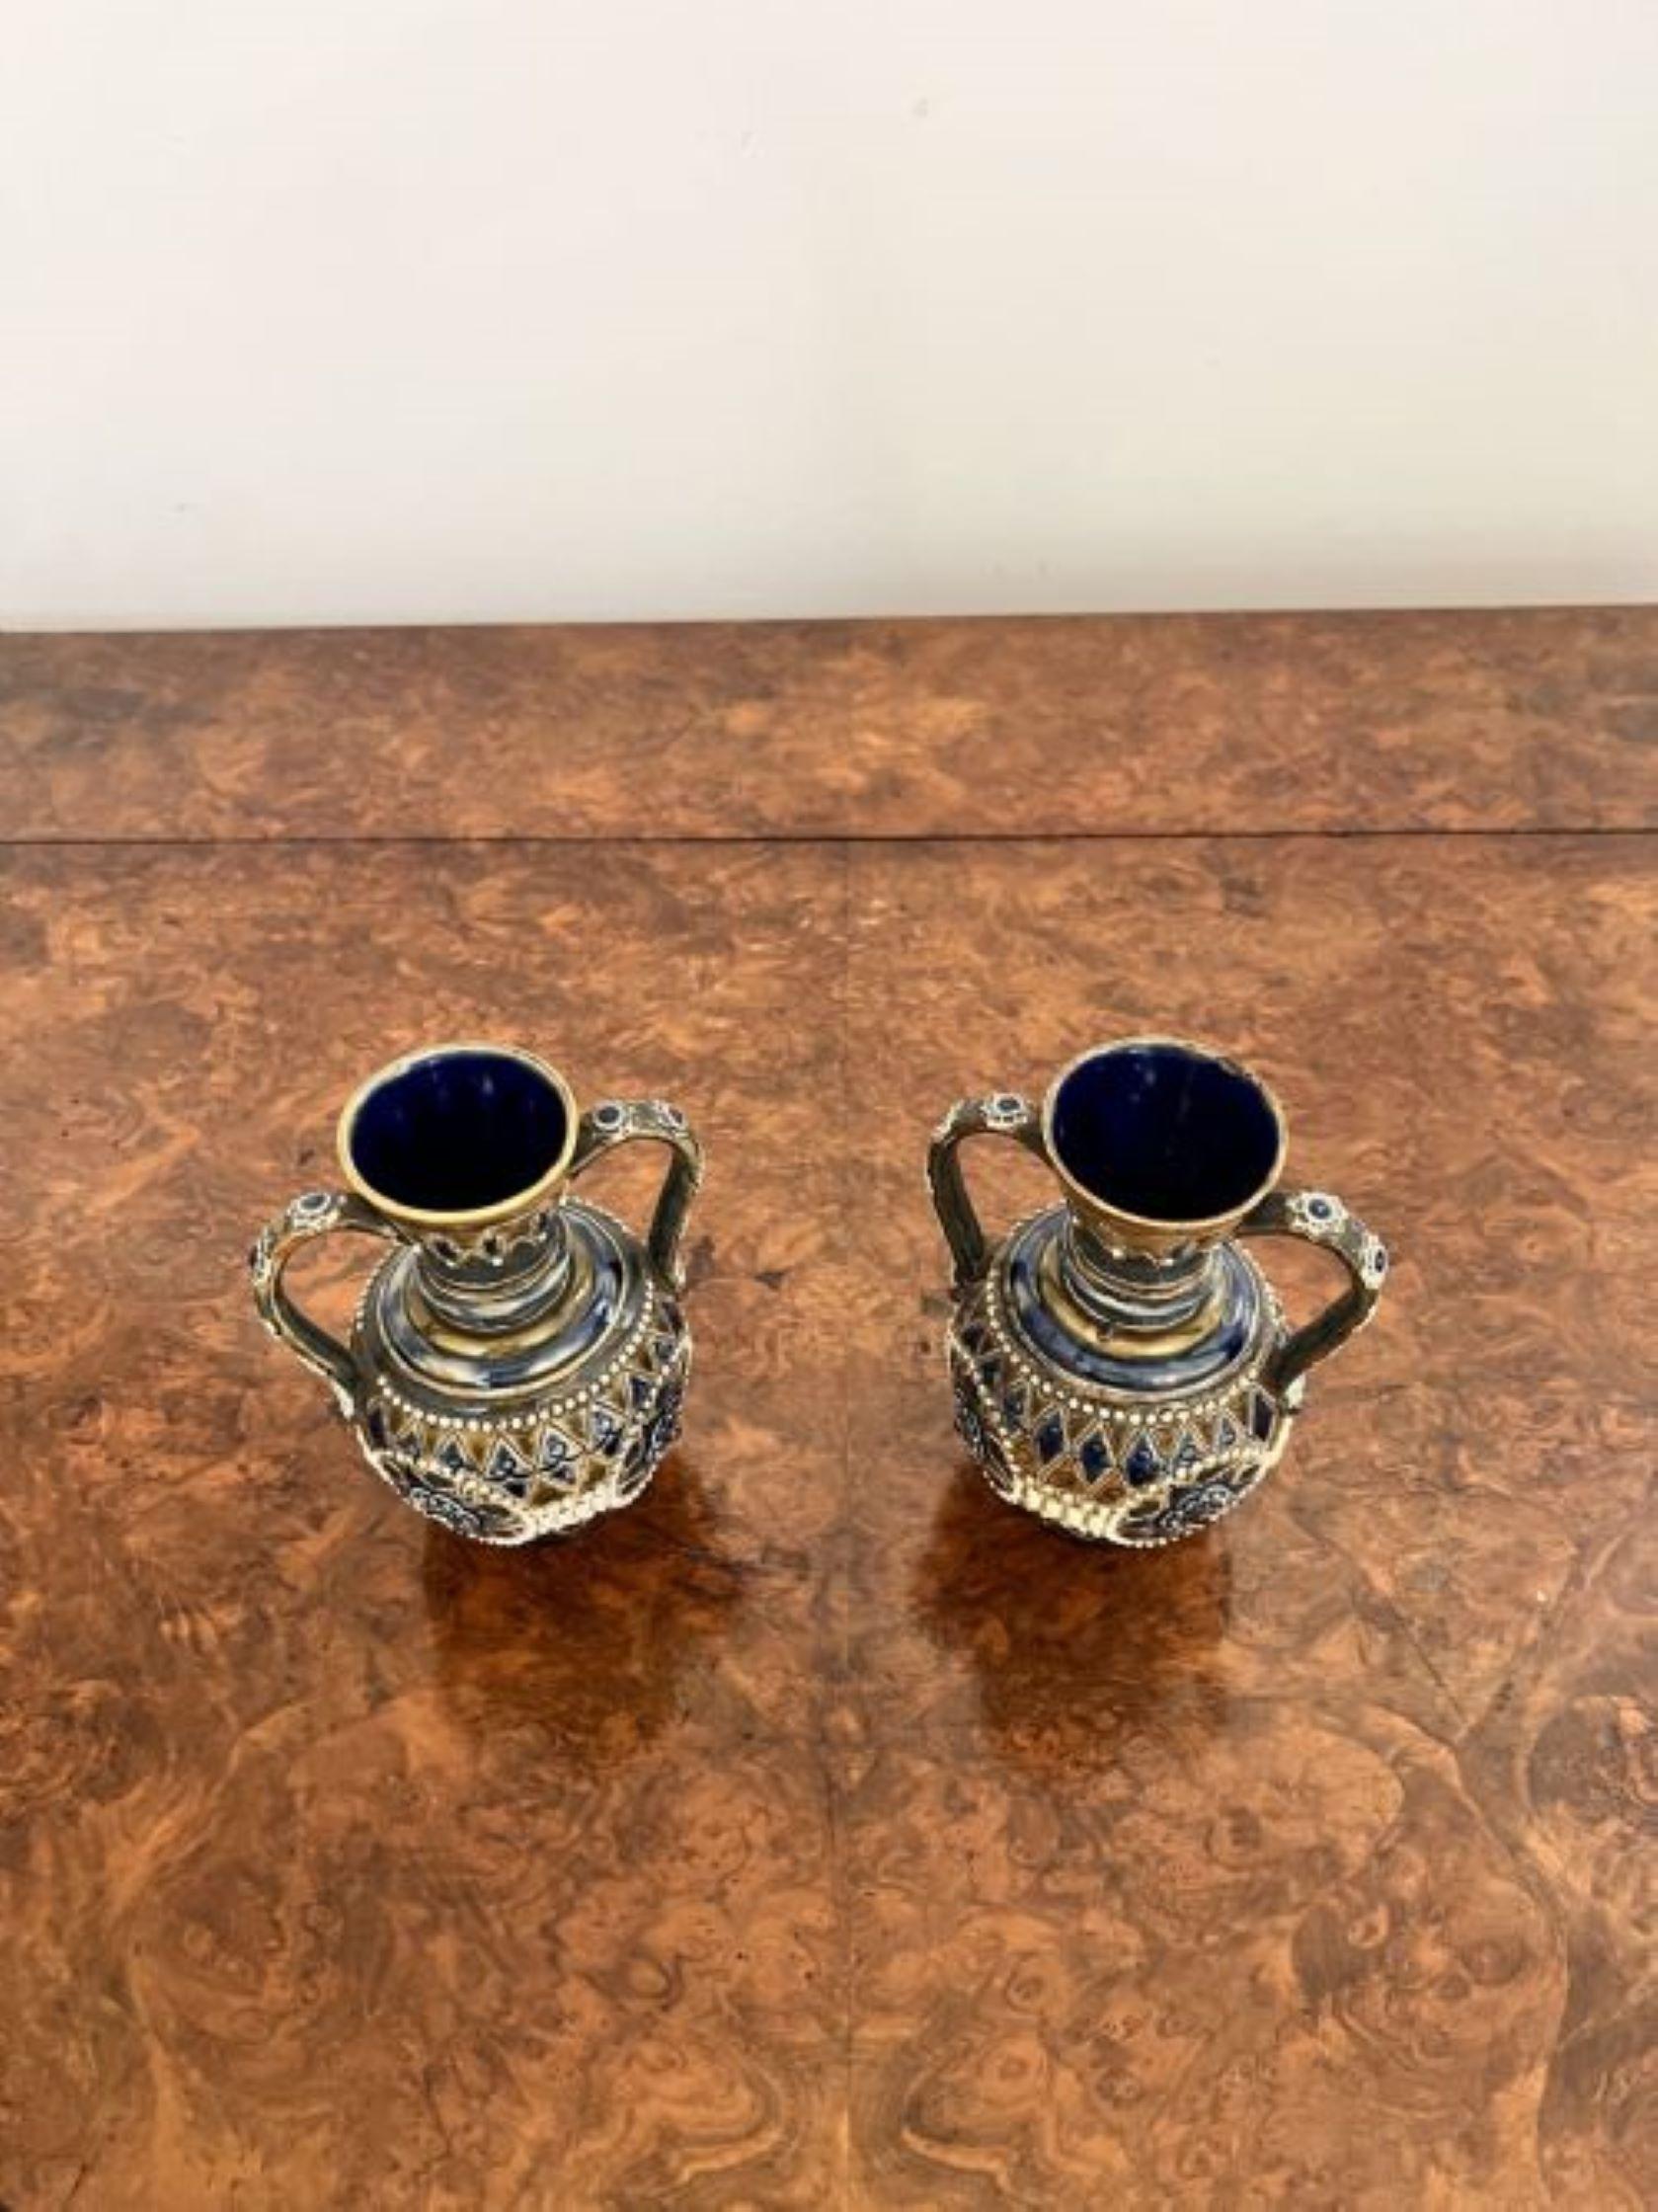 Fine quality pair of quality antique Victorian Doulton Lambeth small vases having a quality pair of antique Victorian Doulton Lambeth small vases with fantastic decoration throughout in lovely green, blue and brown and white colours, with two shaped